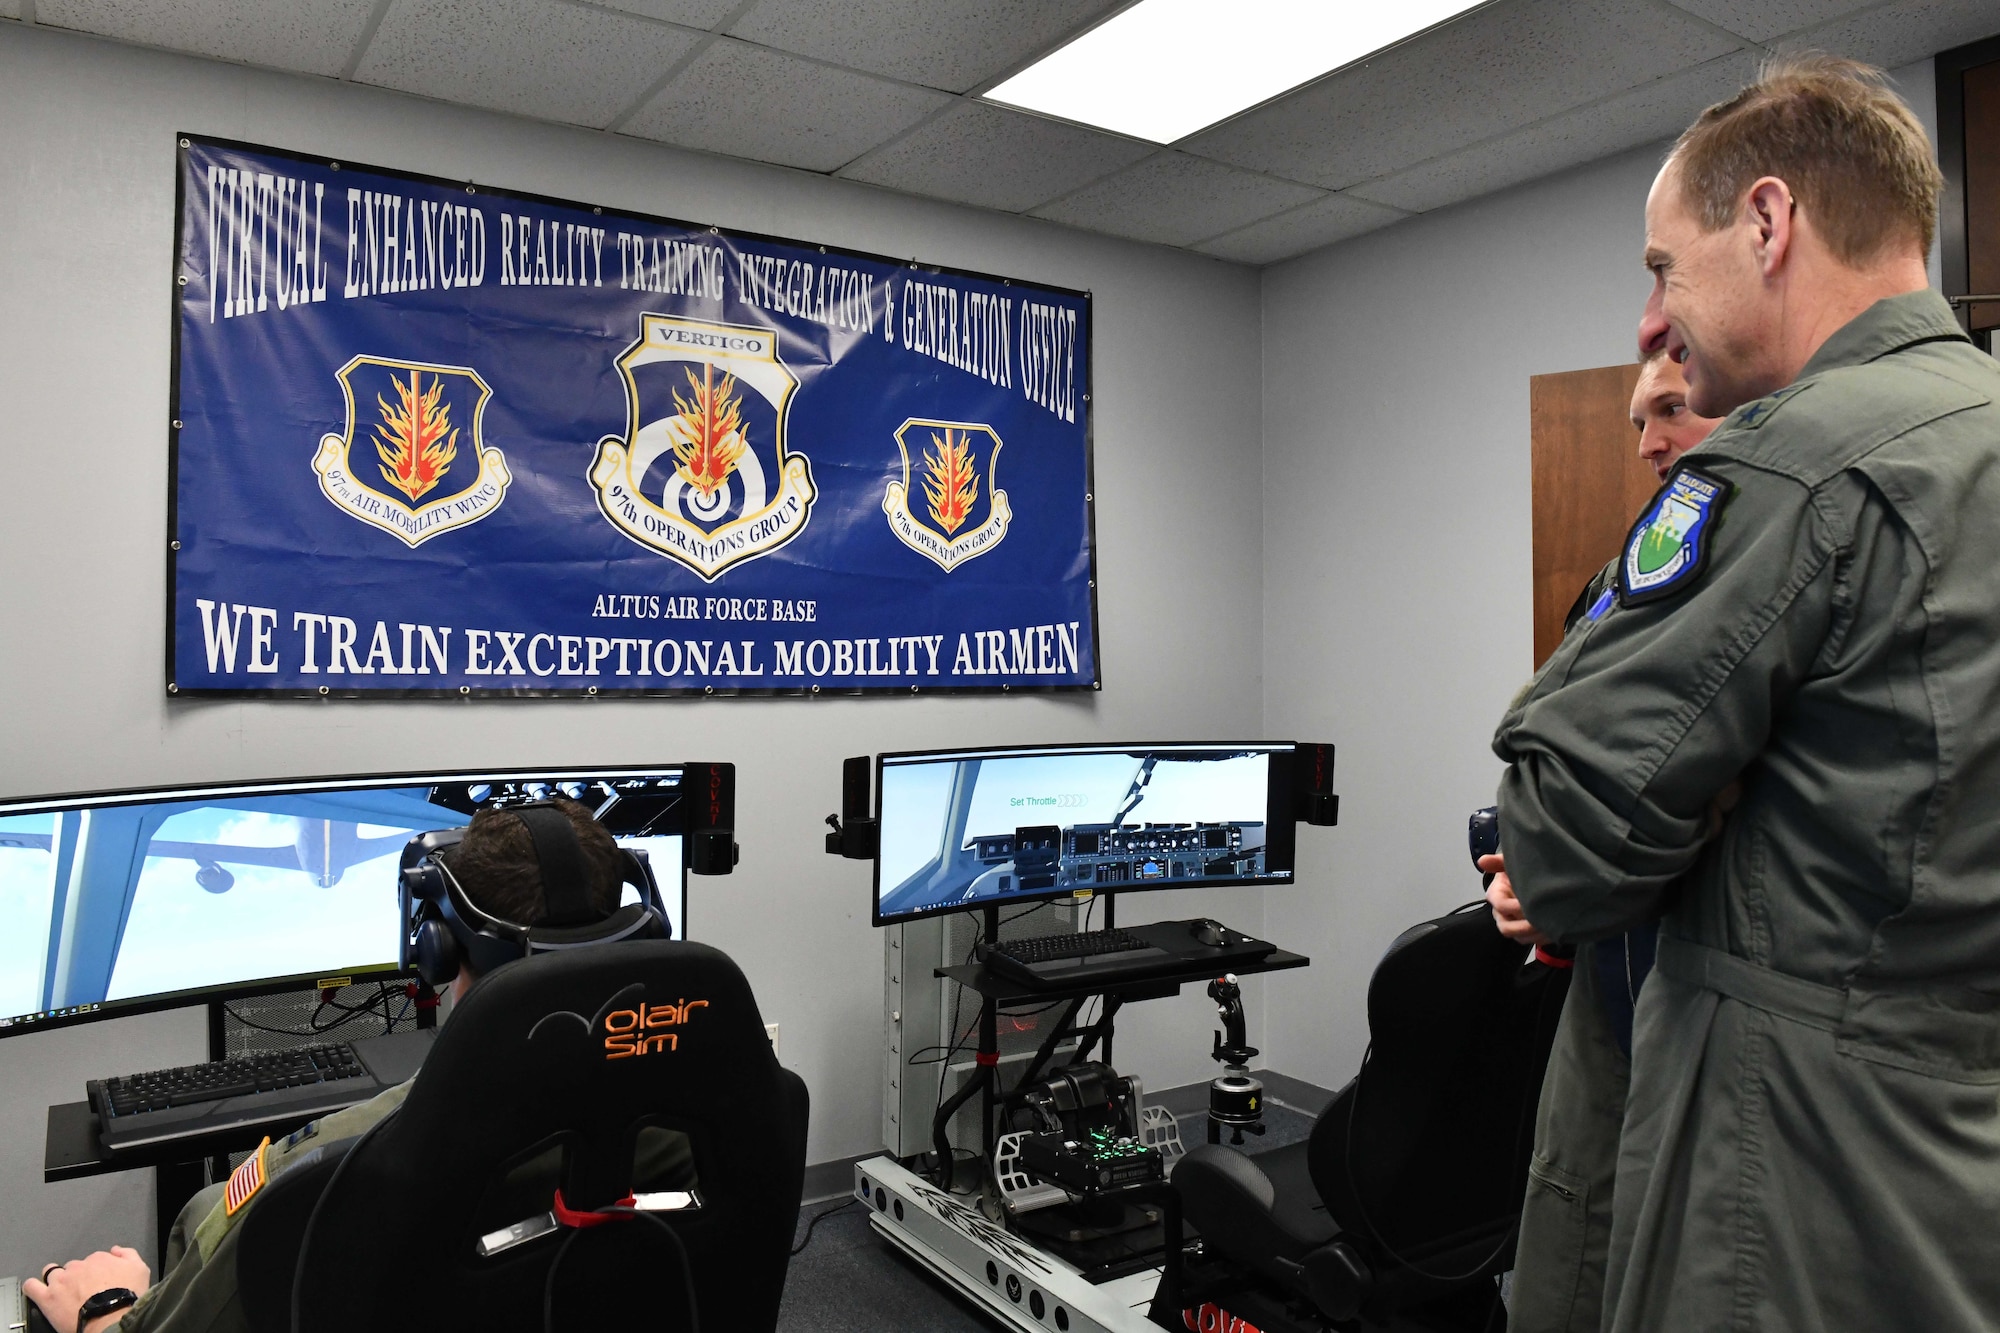 U.S. Air Force Maj. Gen. Corey Martin, 18th Air Force commander, watches as a student from the 97th Training Squadron operates a flight simulator at Altus Air Force Base, Oklahoma, Jan. 26, 2023. The use of flight simulators provide a safe opportunity for student pilots to practice their initial flying skills. (U.S. Air Force photo by Airman 1st Class Miyah Gray)